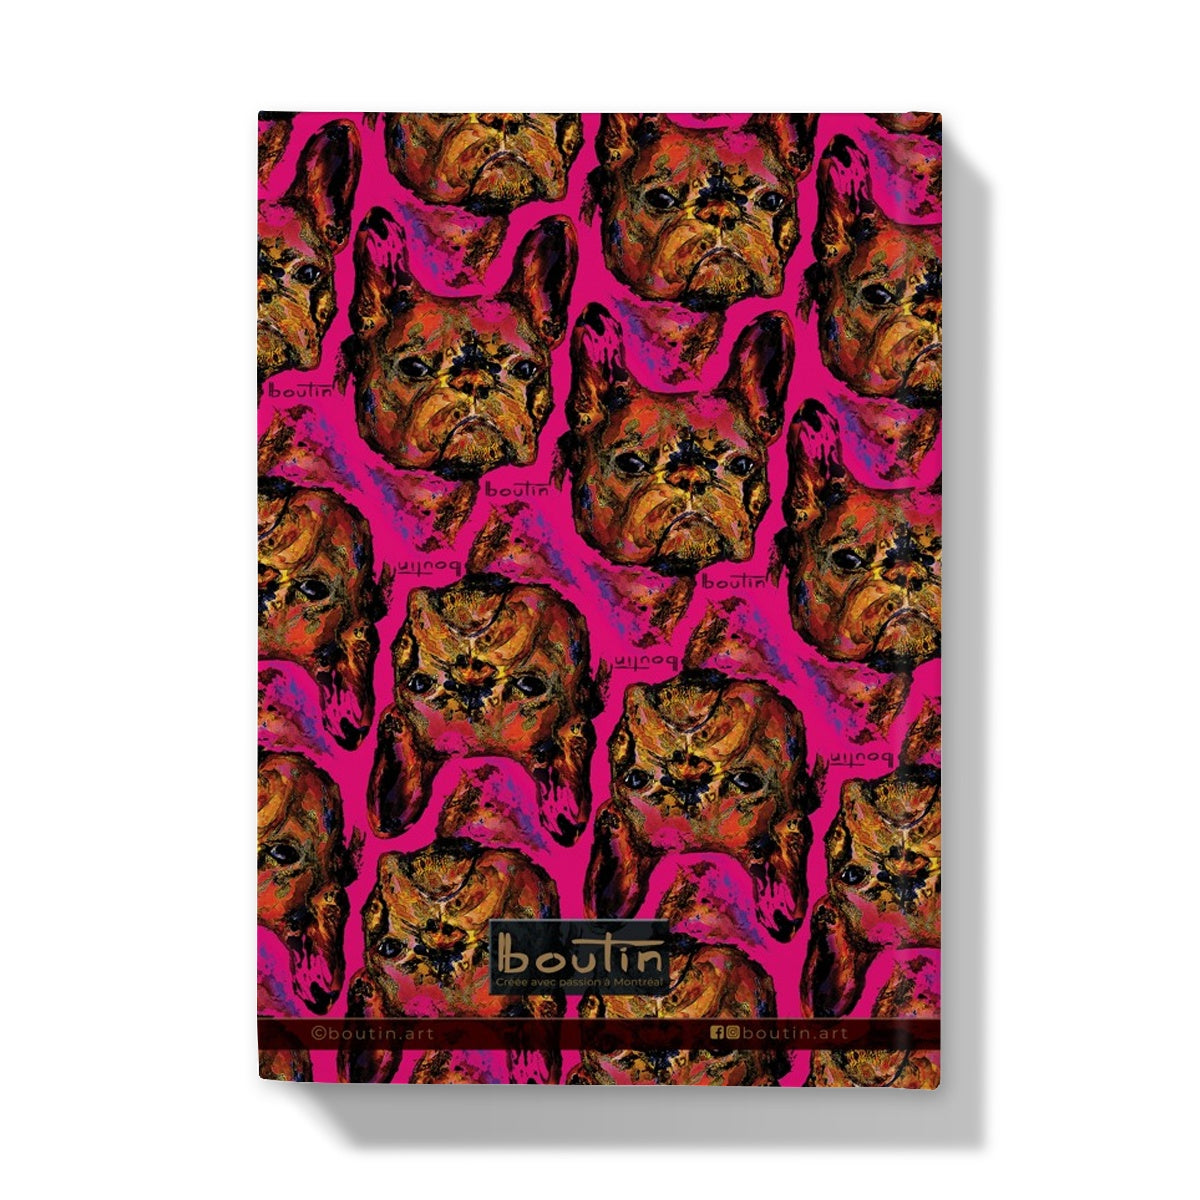 King George Magenta - Notebook by the artist Boutin